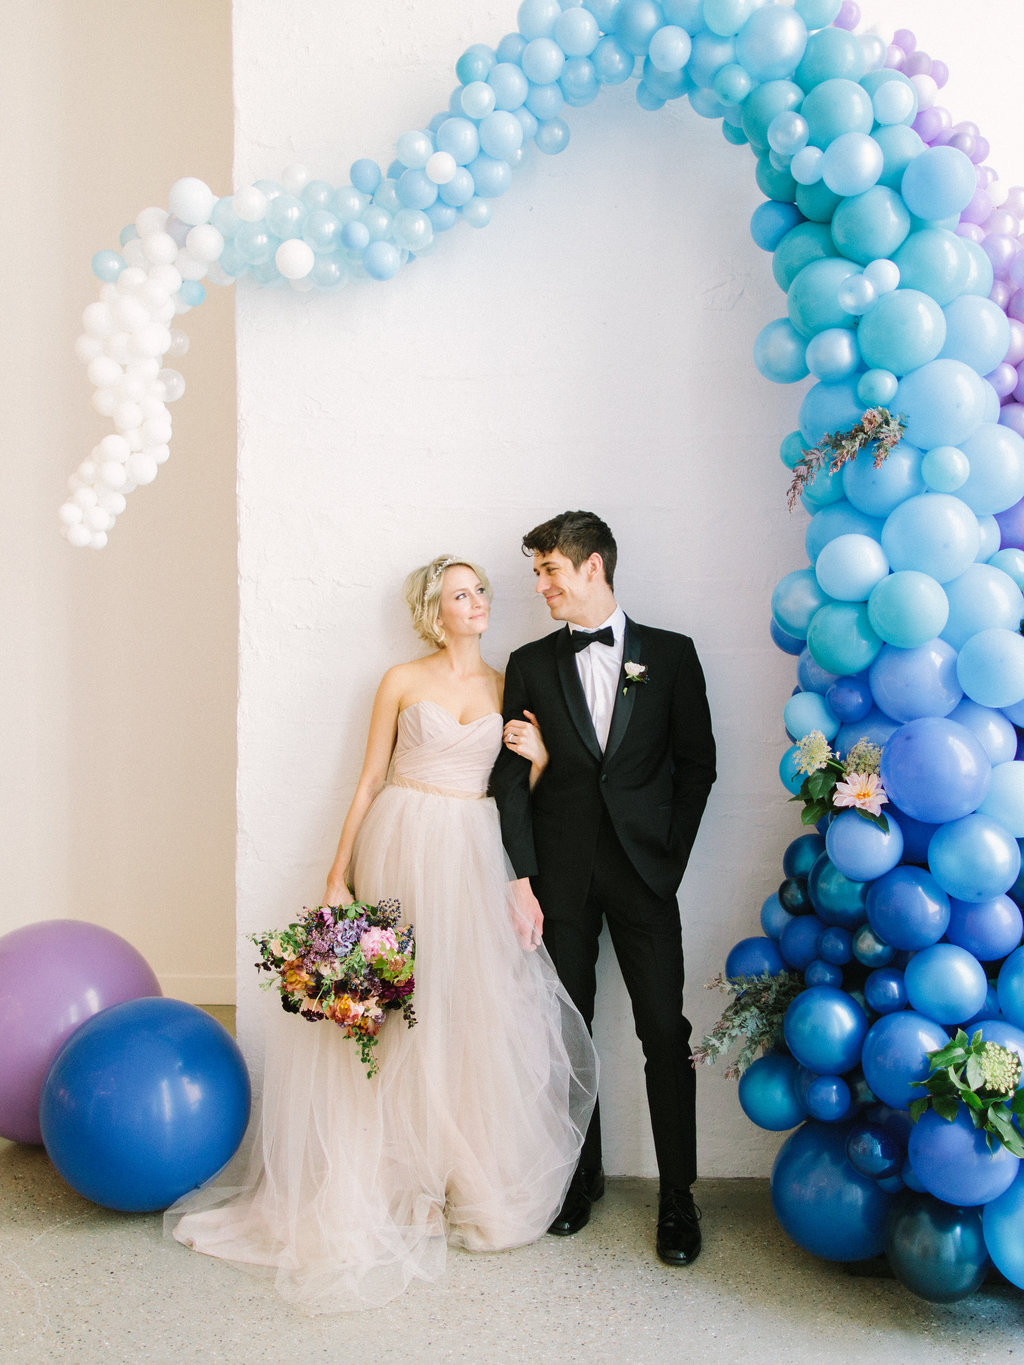 Bride and groom with playful blue ceremony backdrop and champagne dress with gardeny bouquet of pink dahlia and peonies, irises, plum scabiosa, hydrangea, berries, tweedia, and lilac.